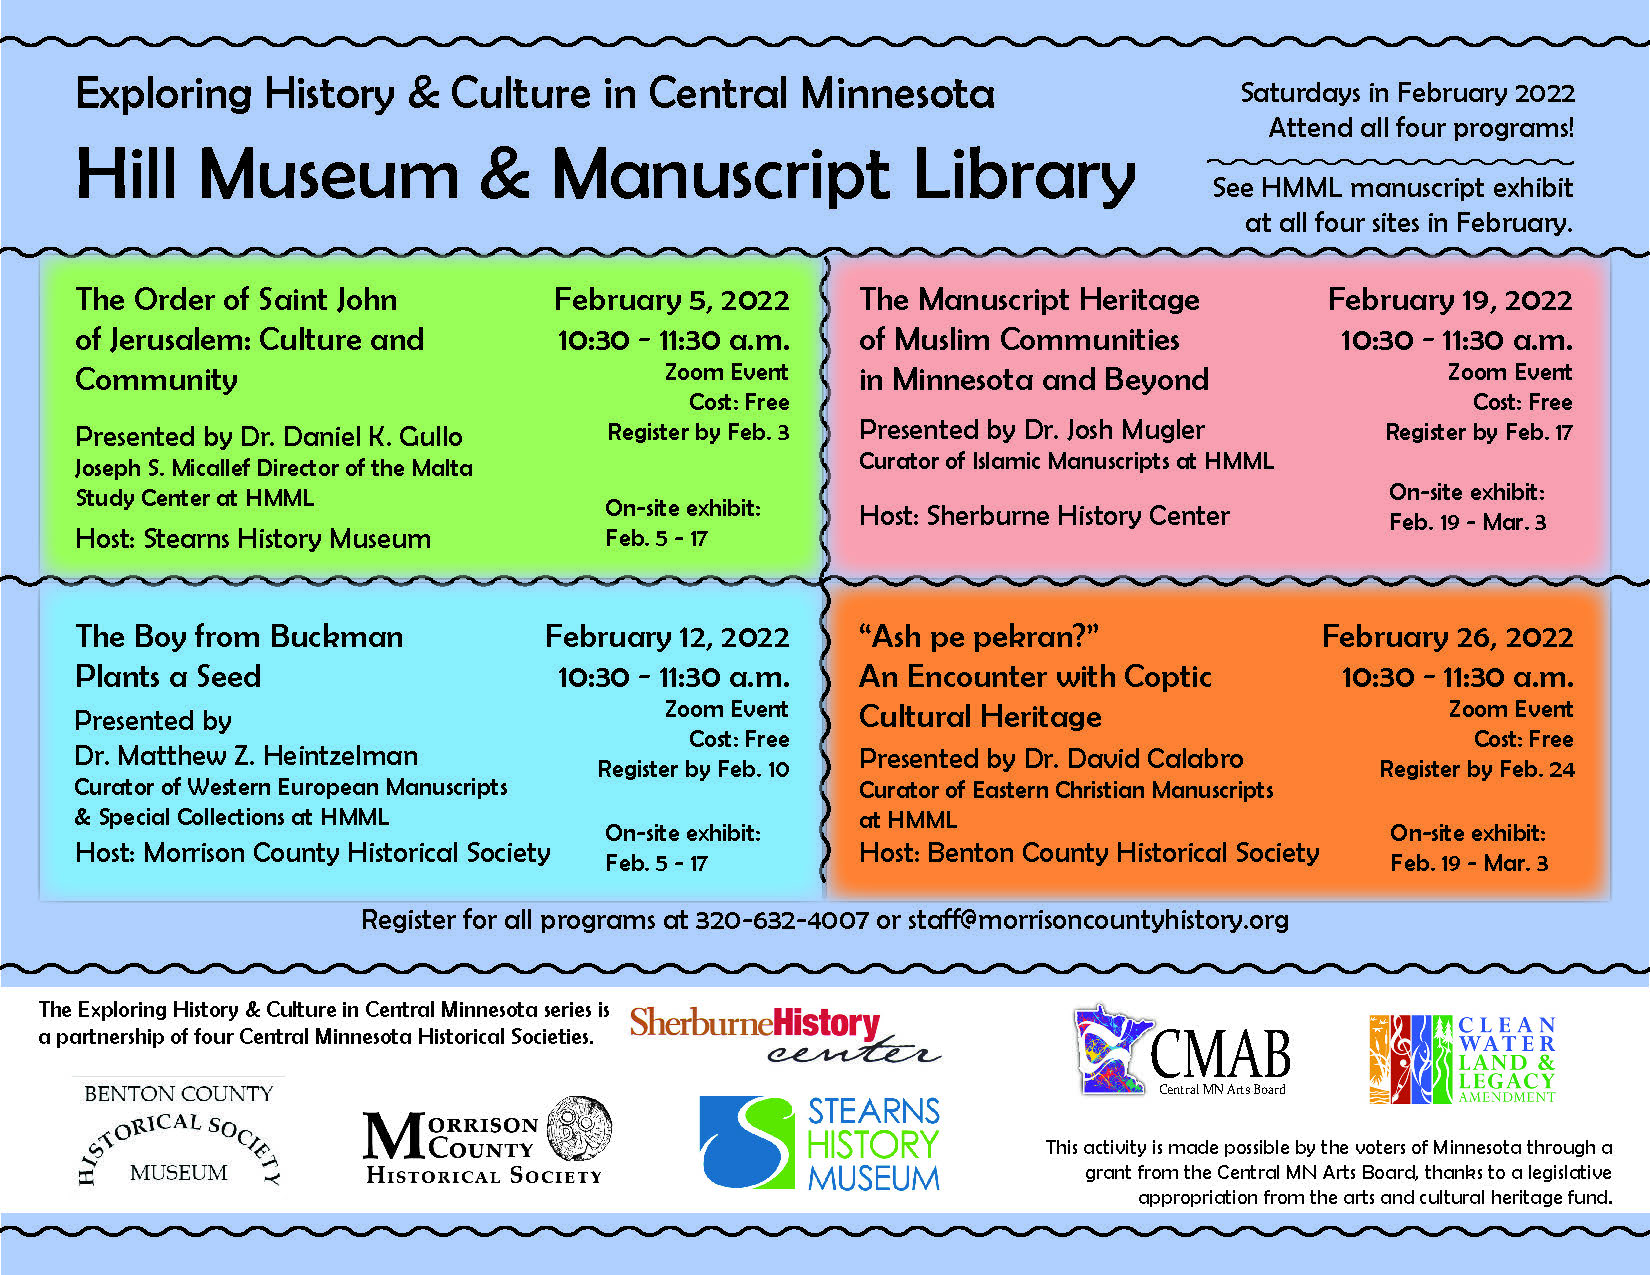 2022 Exploring History & Culture in Central Minnesota - Hill Museum & Manuscript Library